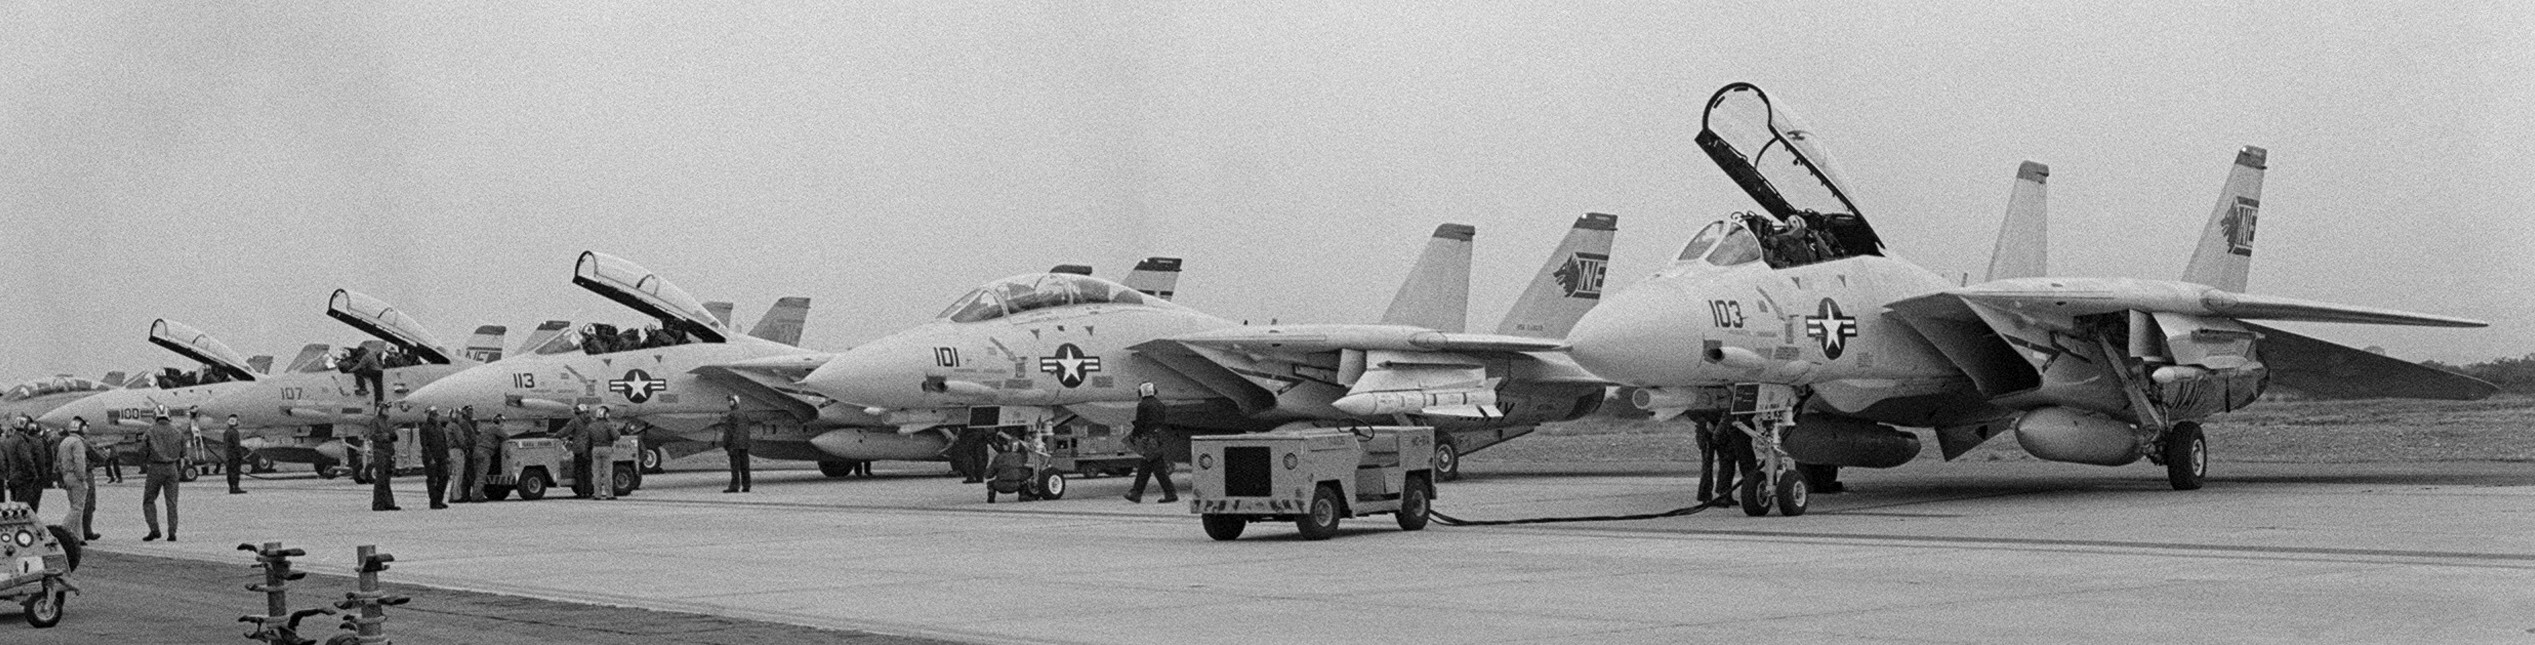 vf-1 wolfpack fighter squadron f-14a tomcat carrier air wing cvw-2 53 nas miramar